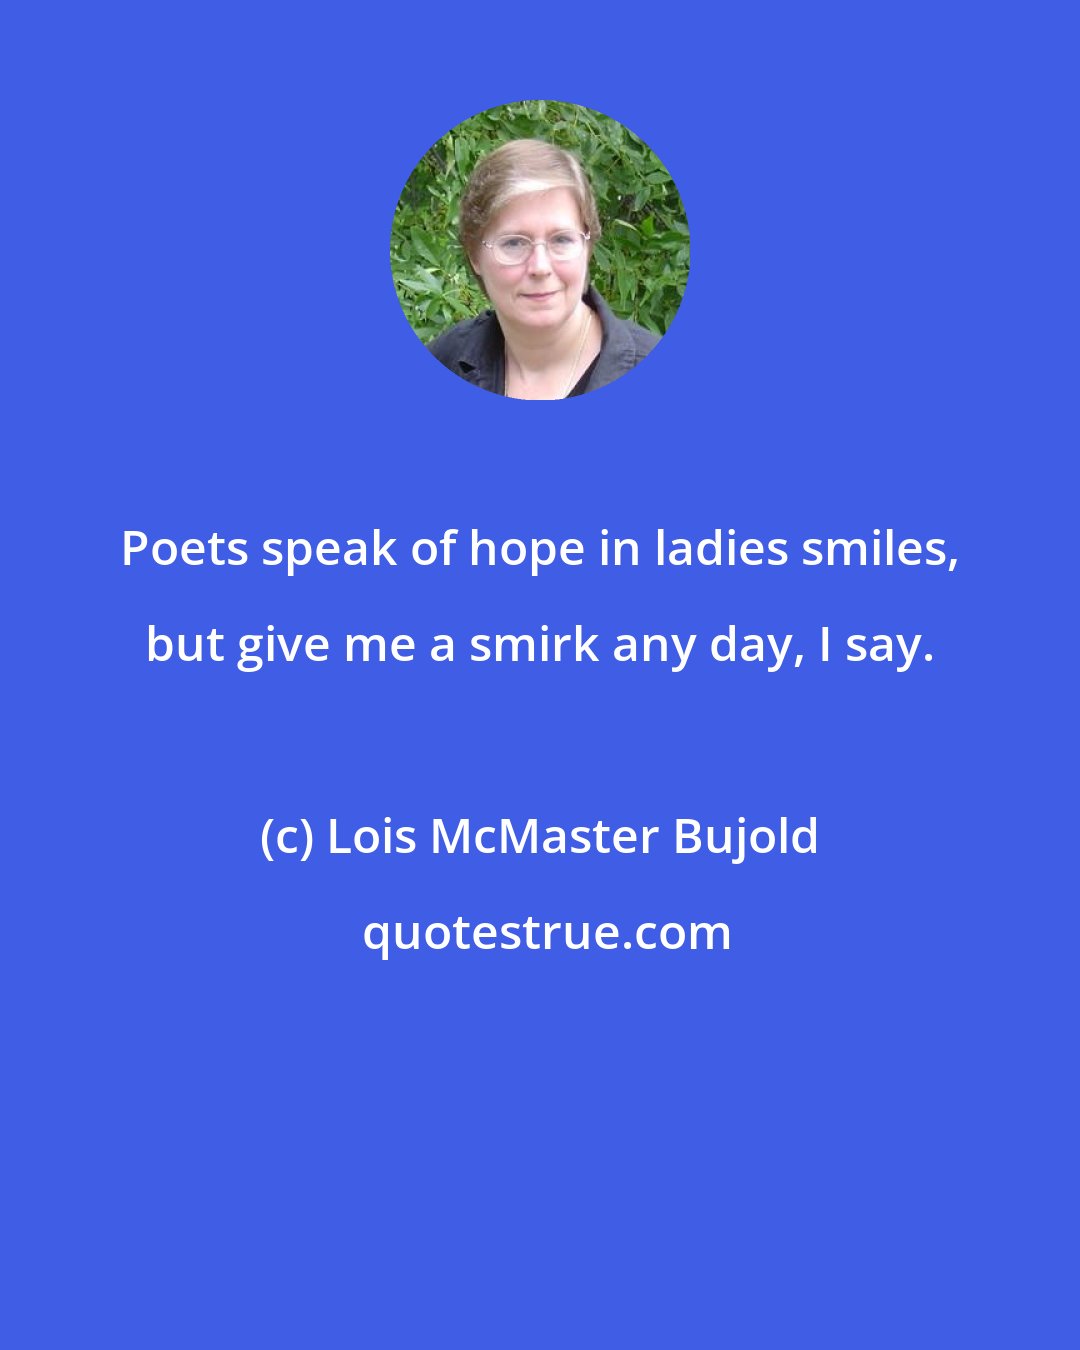 Lois McMaster Bujold: Poets speak of hope in ladies smiles, but give me a smirk any day, I say.